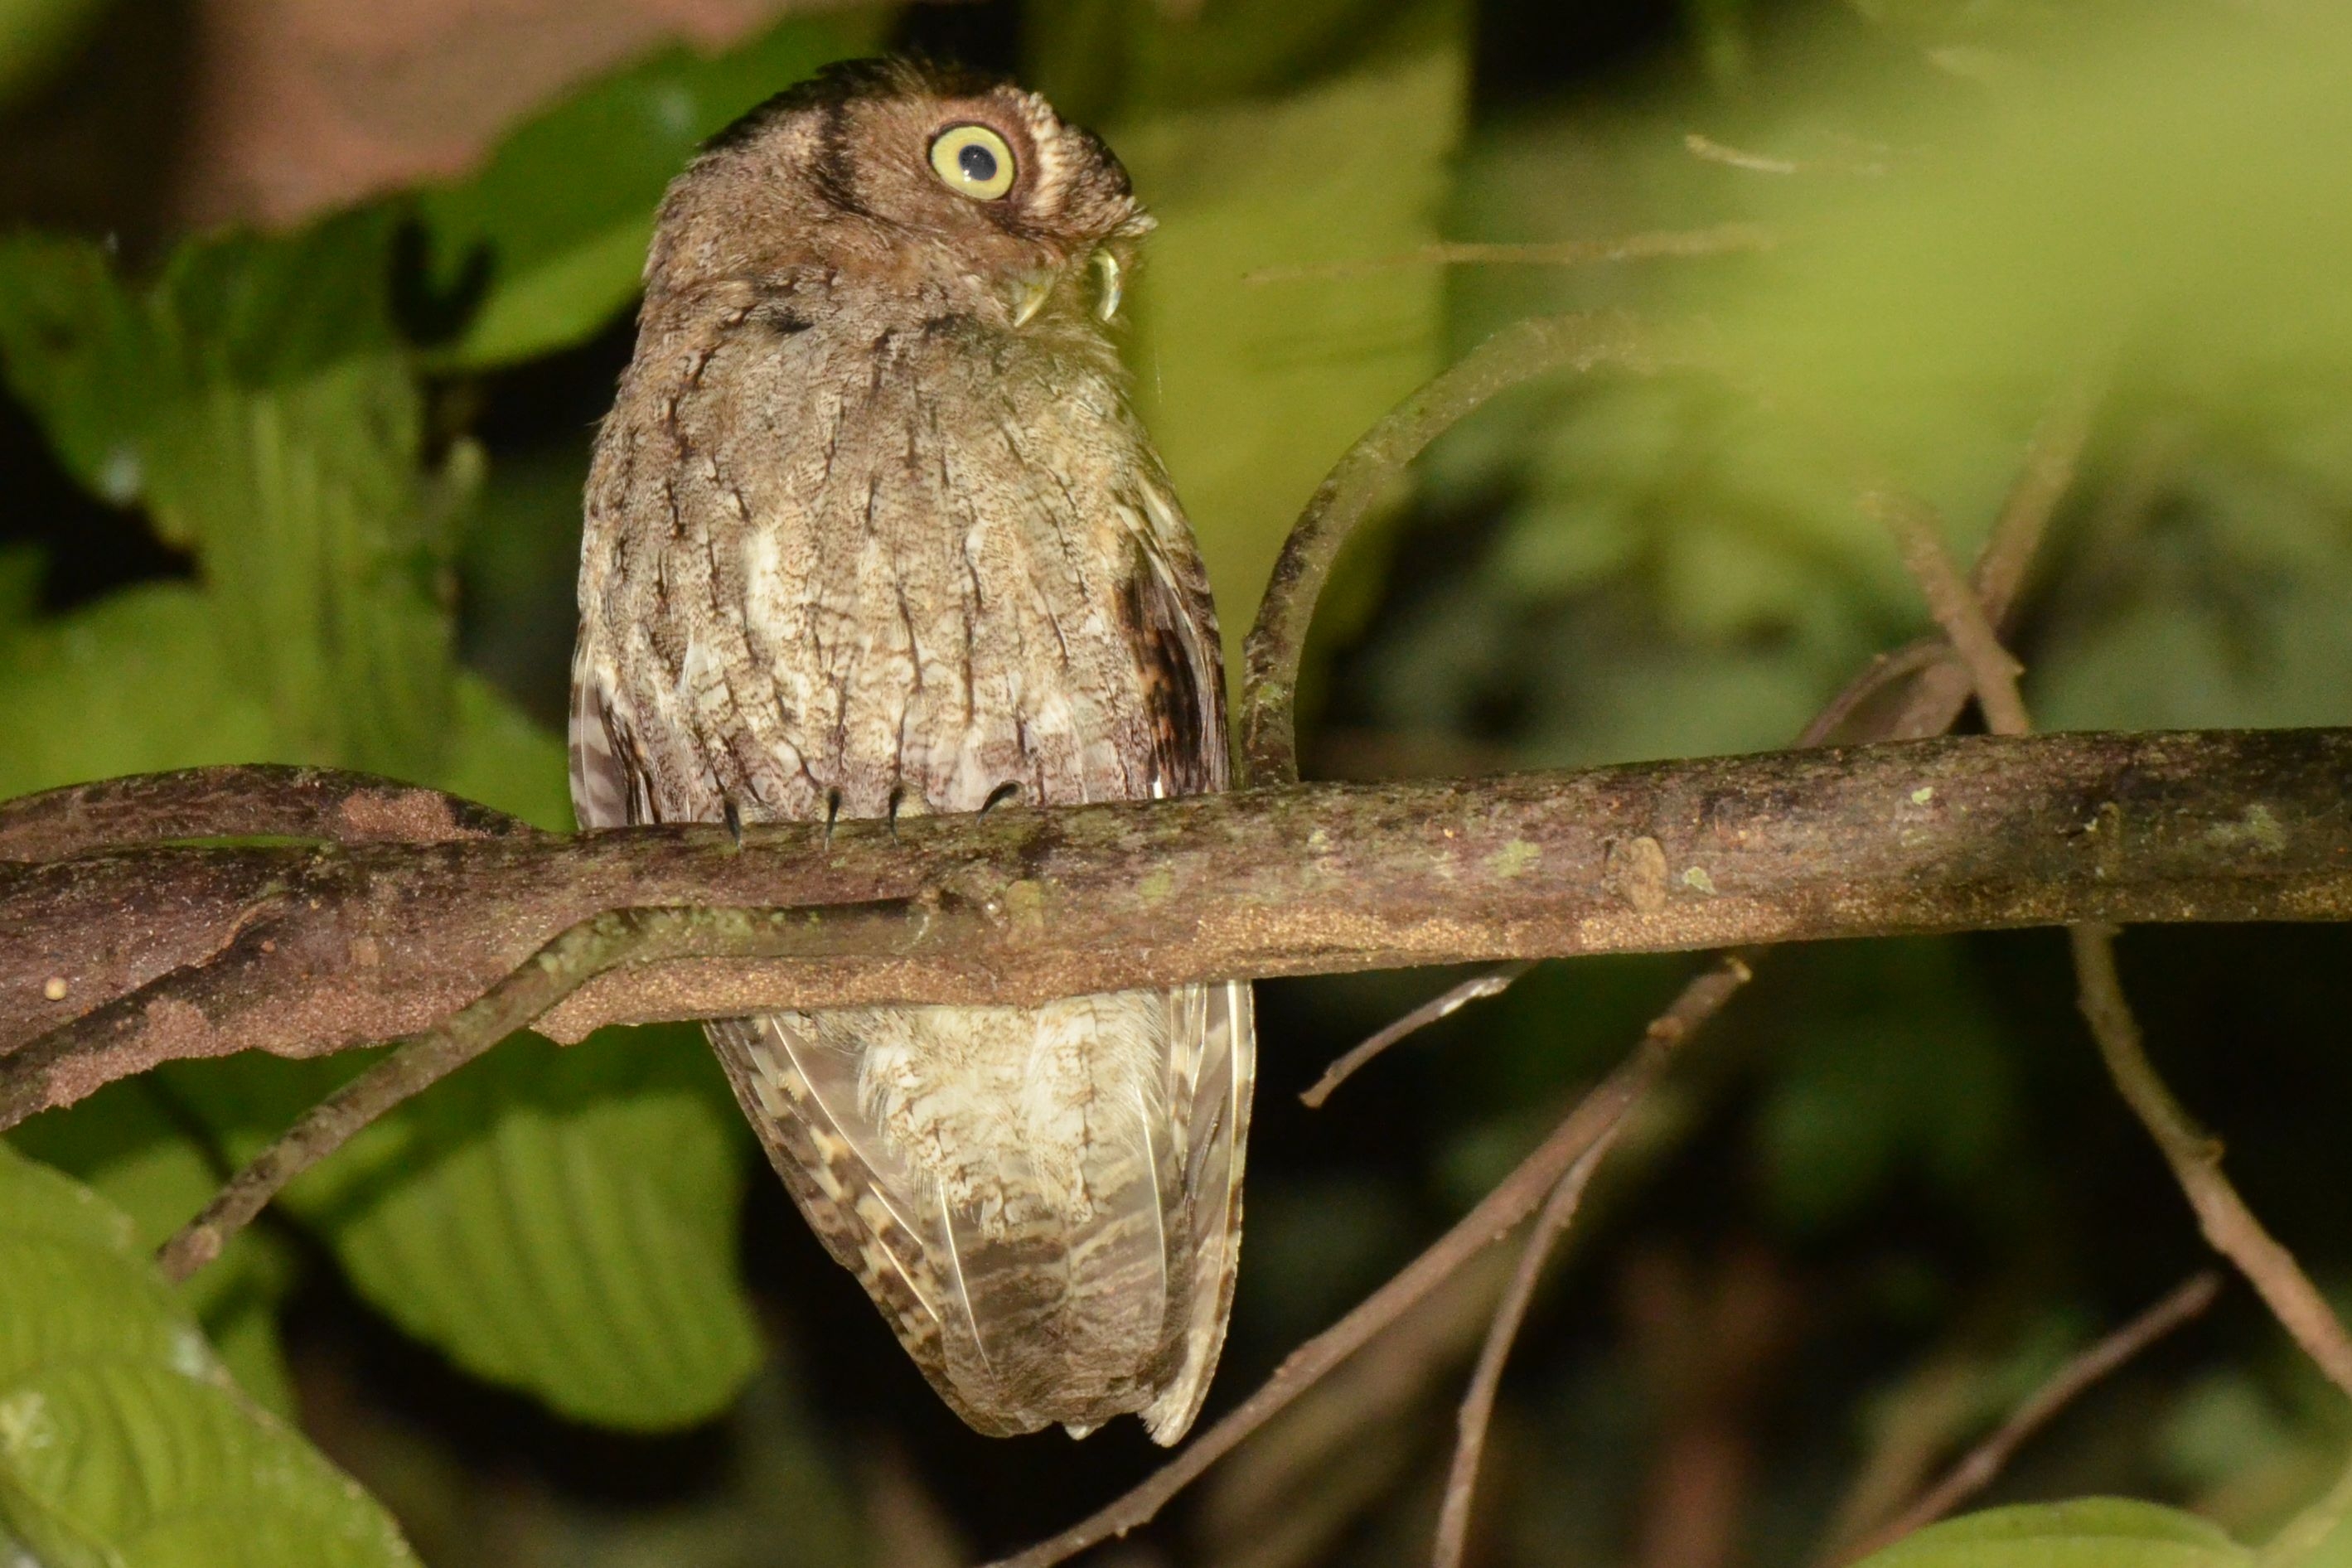 Click picture to see more Vermiculated Screech-Owls.